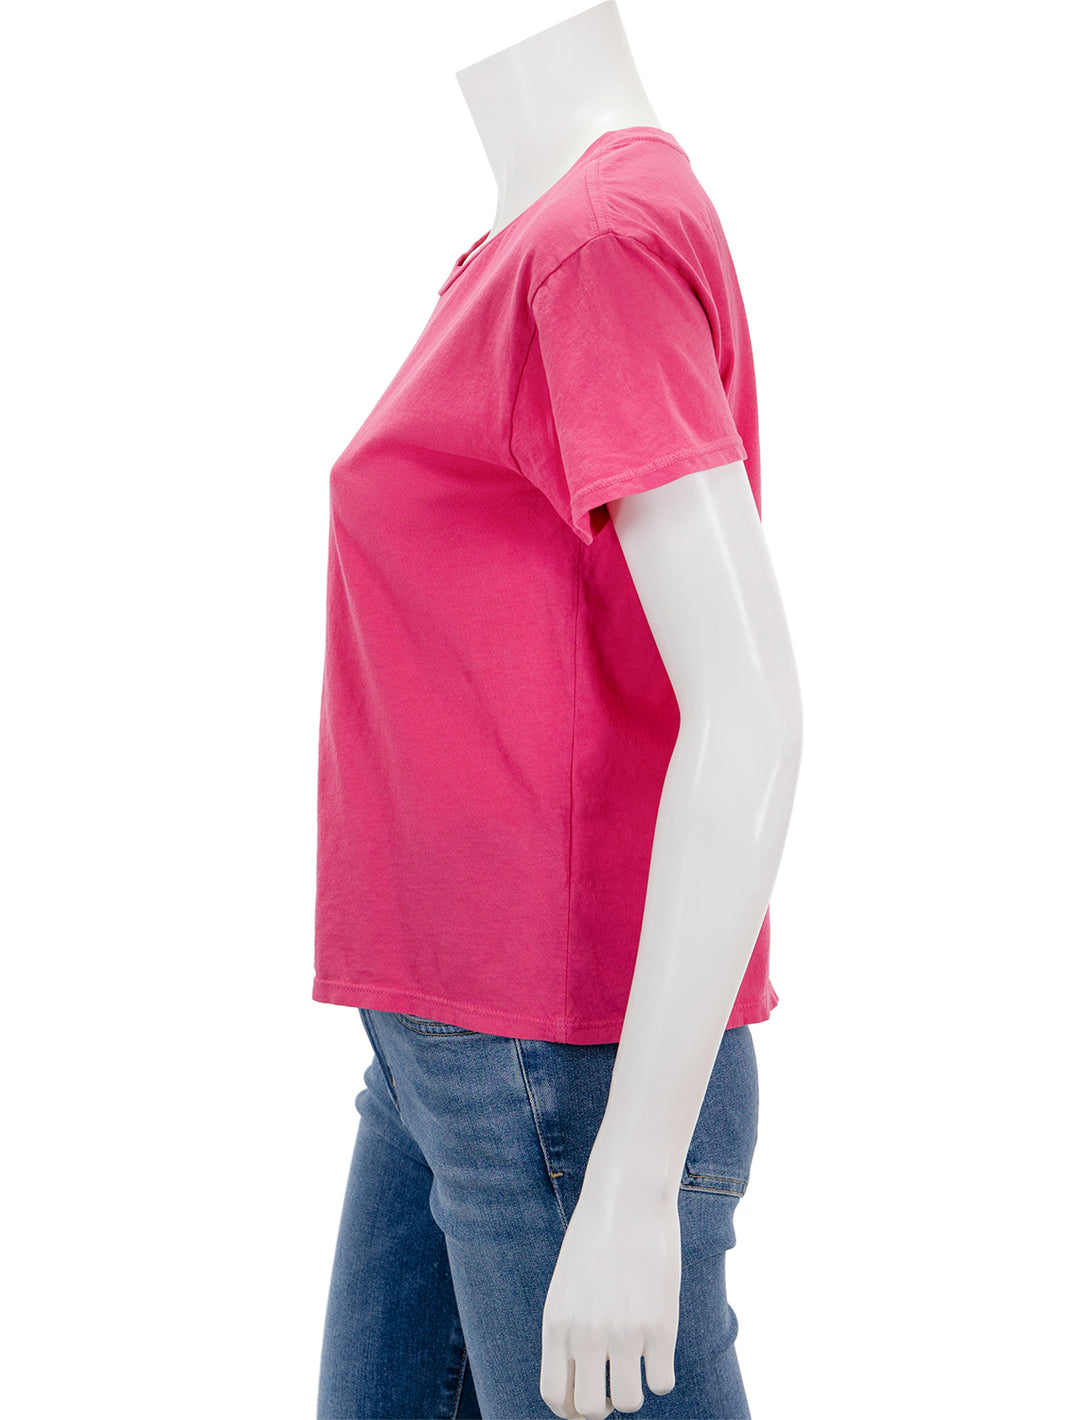 Side view of Perfectwhitetee's harley tee in peony.